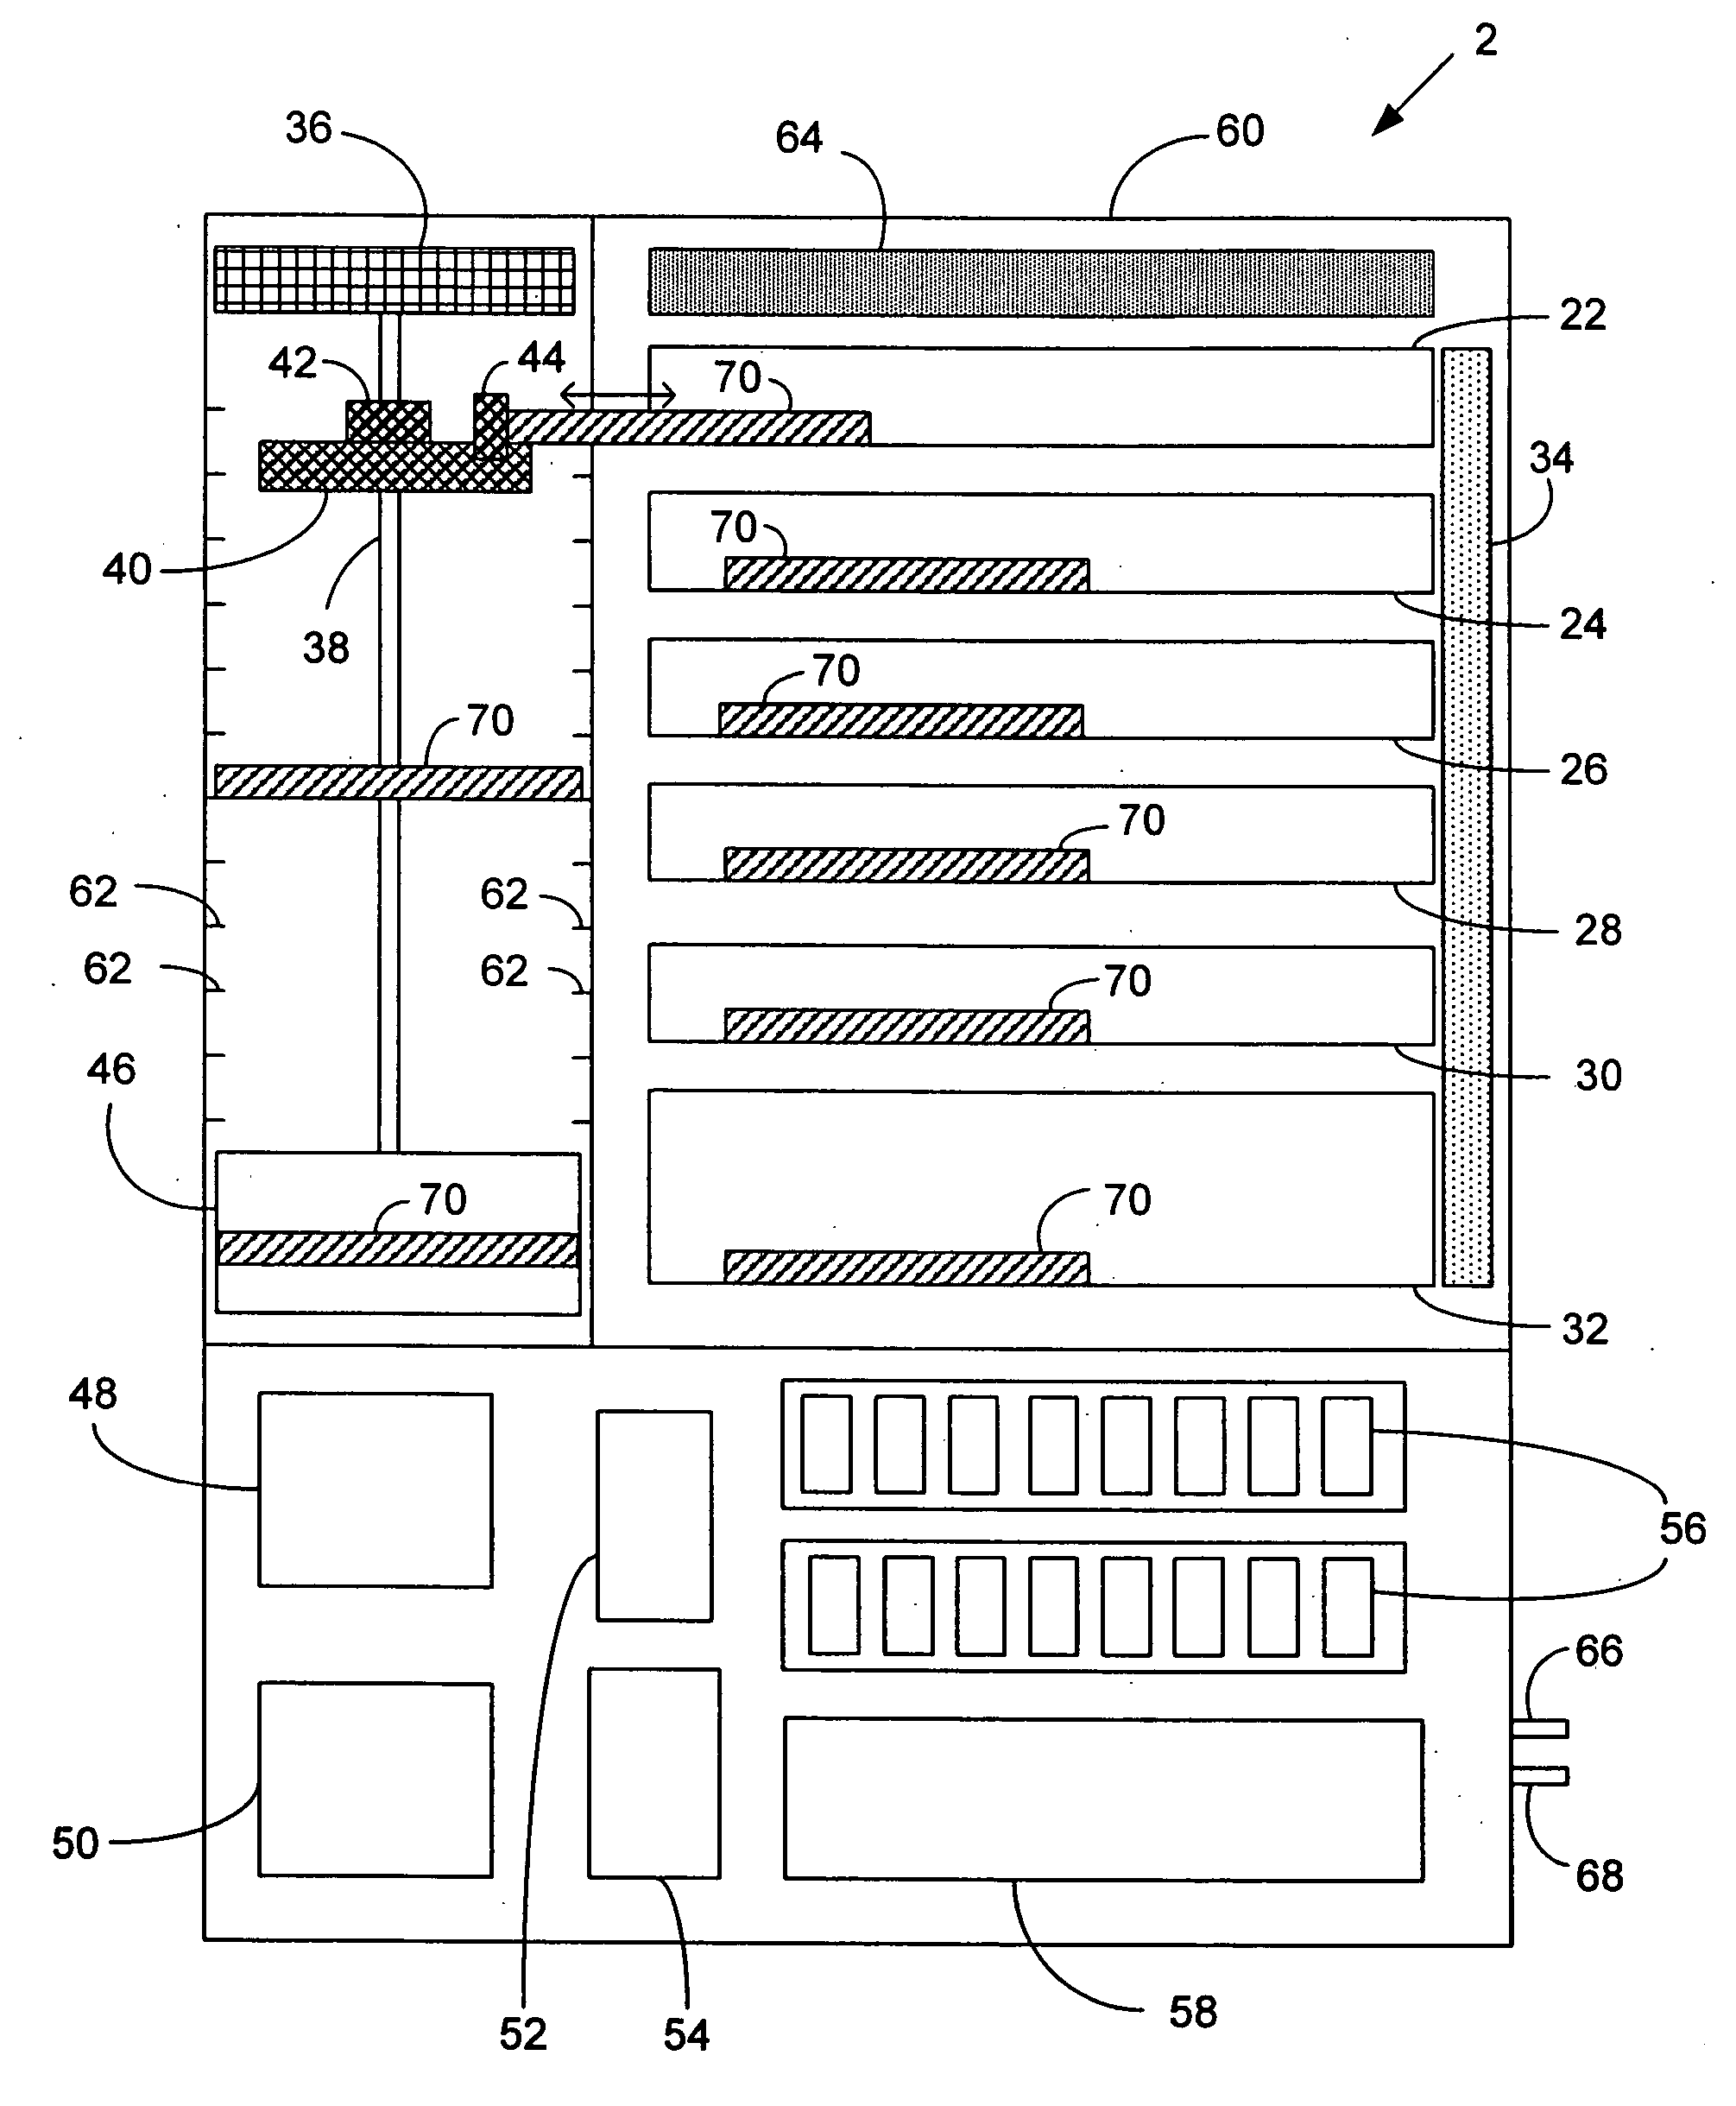 Automated high volume slide processing system